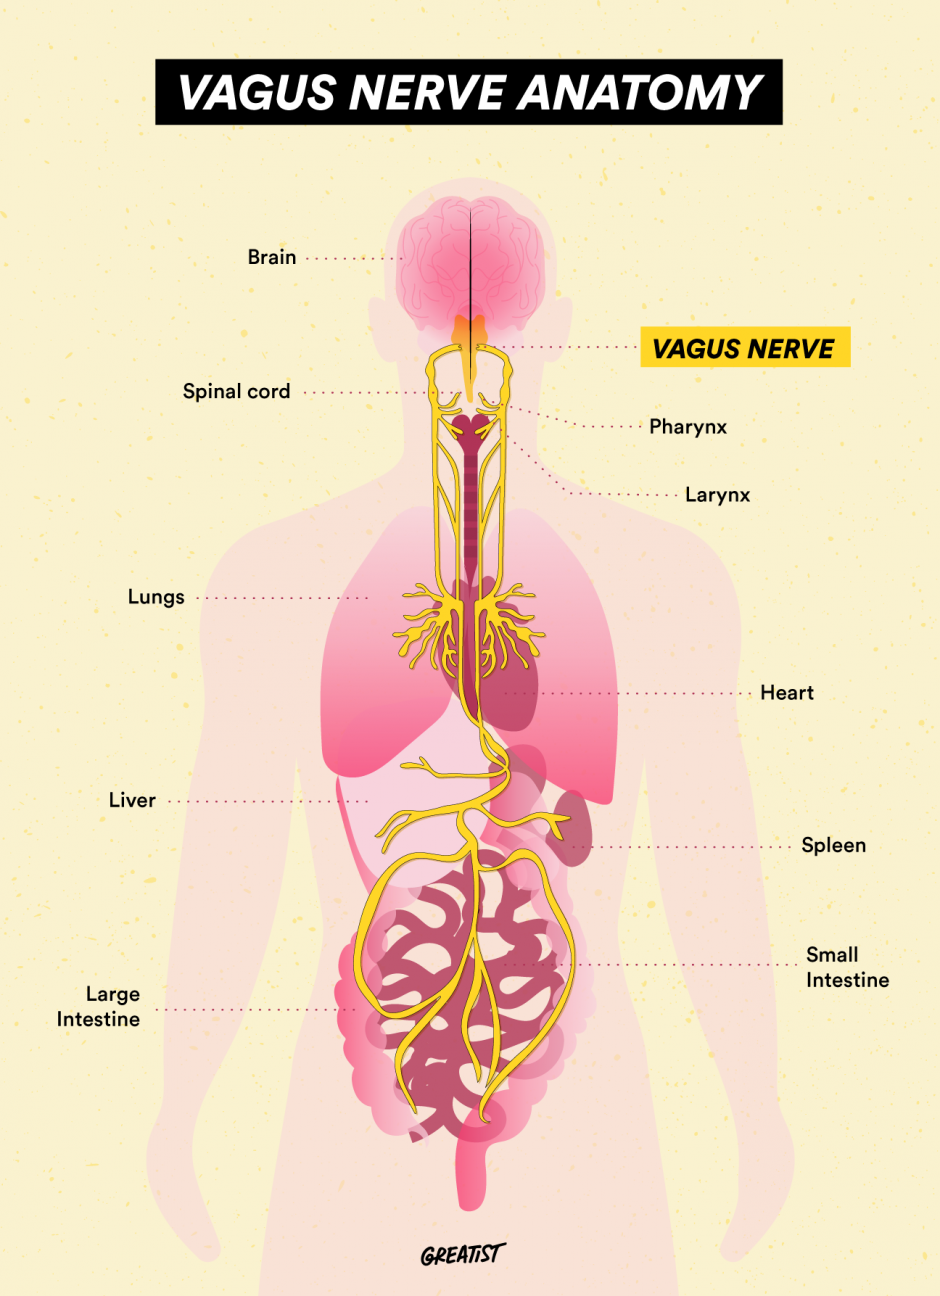 The Vagus Nerve: Anatomy of the Soul